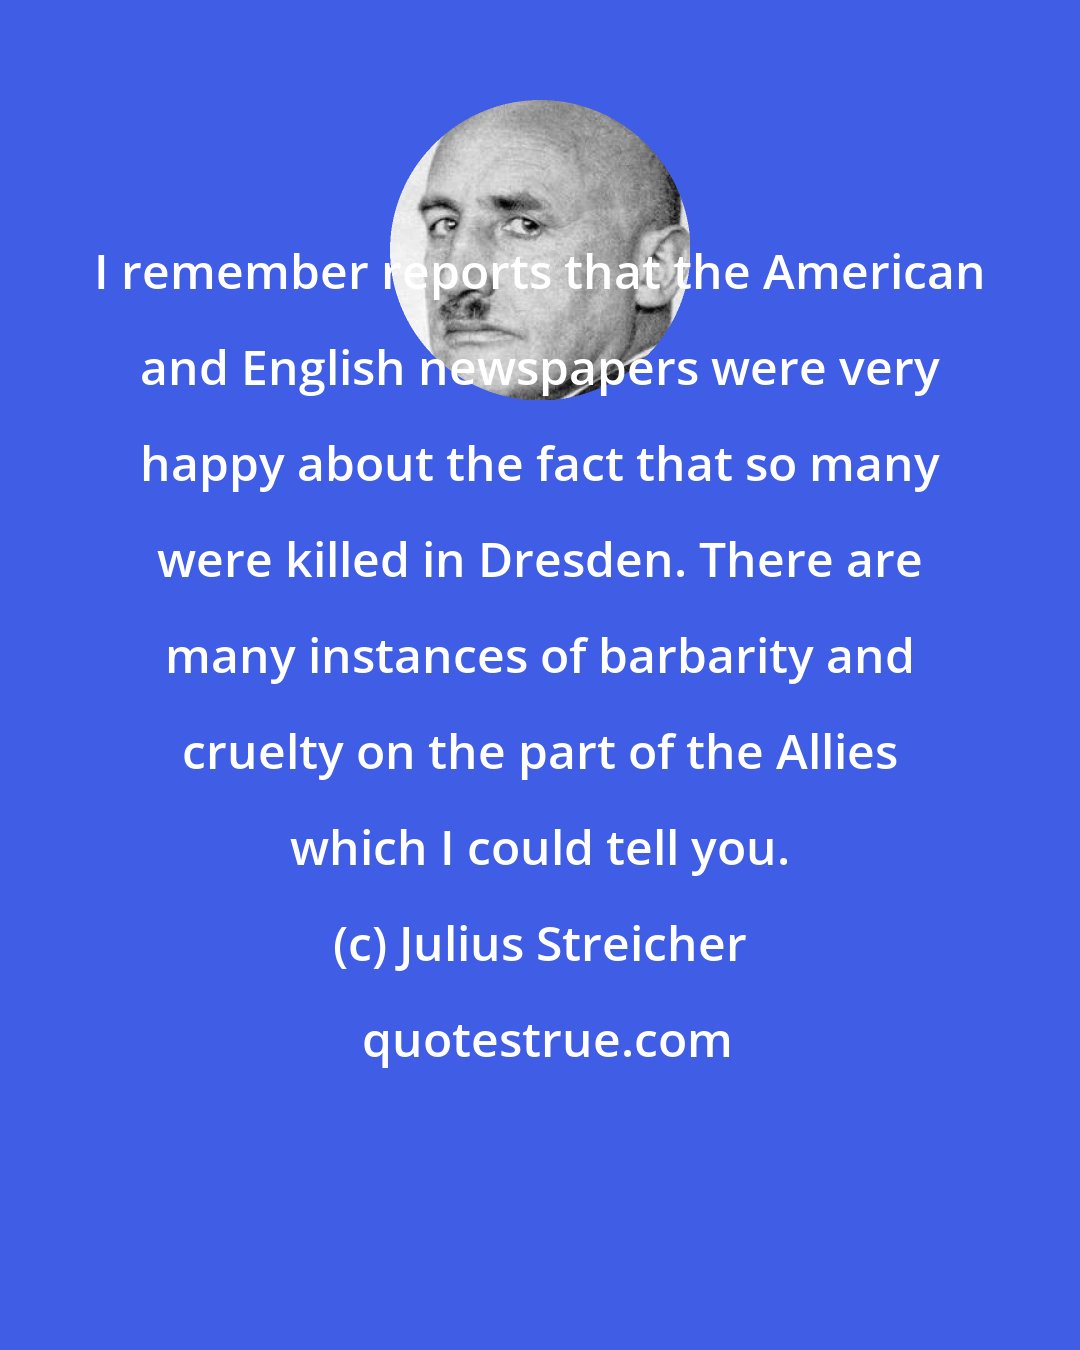 Julius Streicher: I remember reports that the American and English newspapers were very happy about the fact that so many were killed in Dresden. There are many instances of barbarity and cruelty on the part of the Allies which I could tell you.